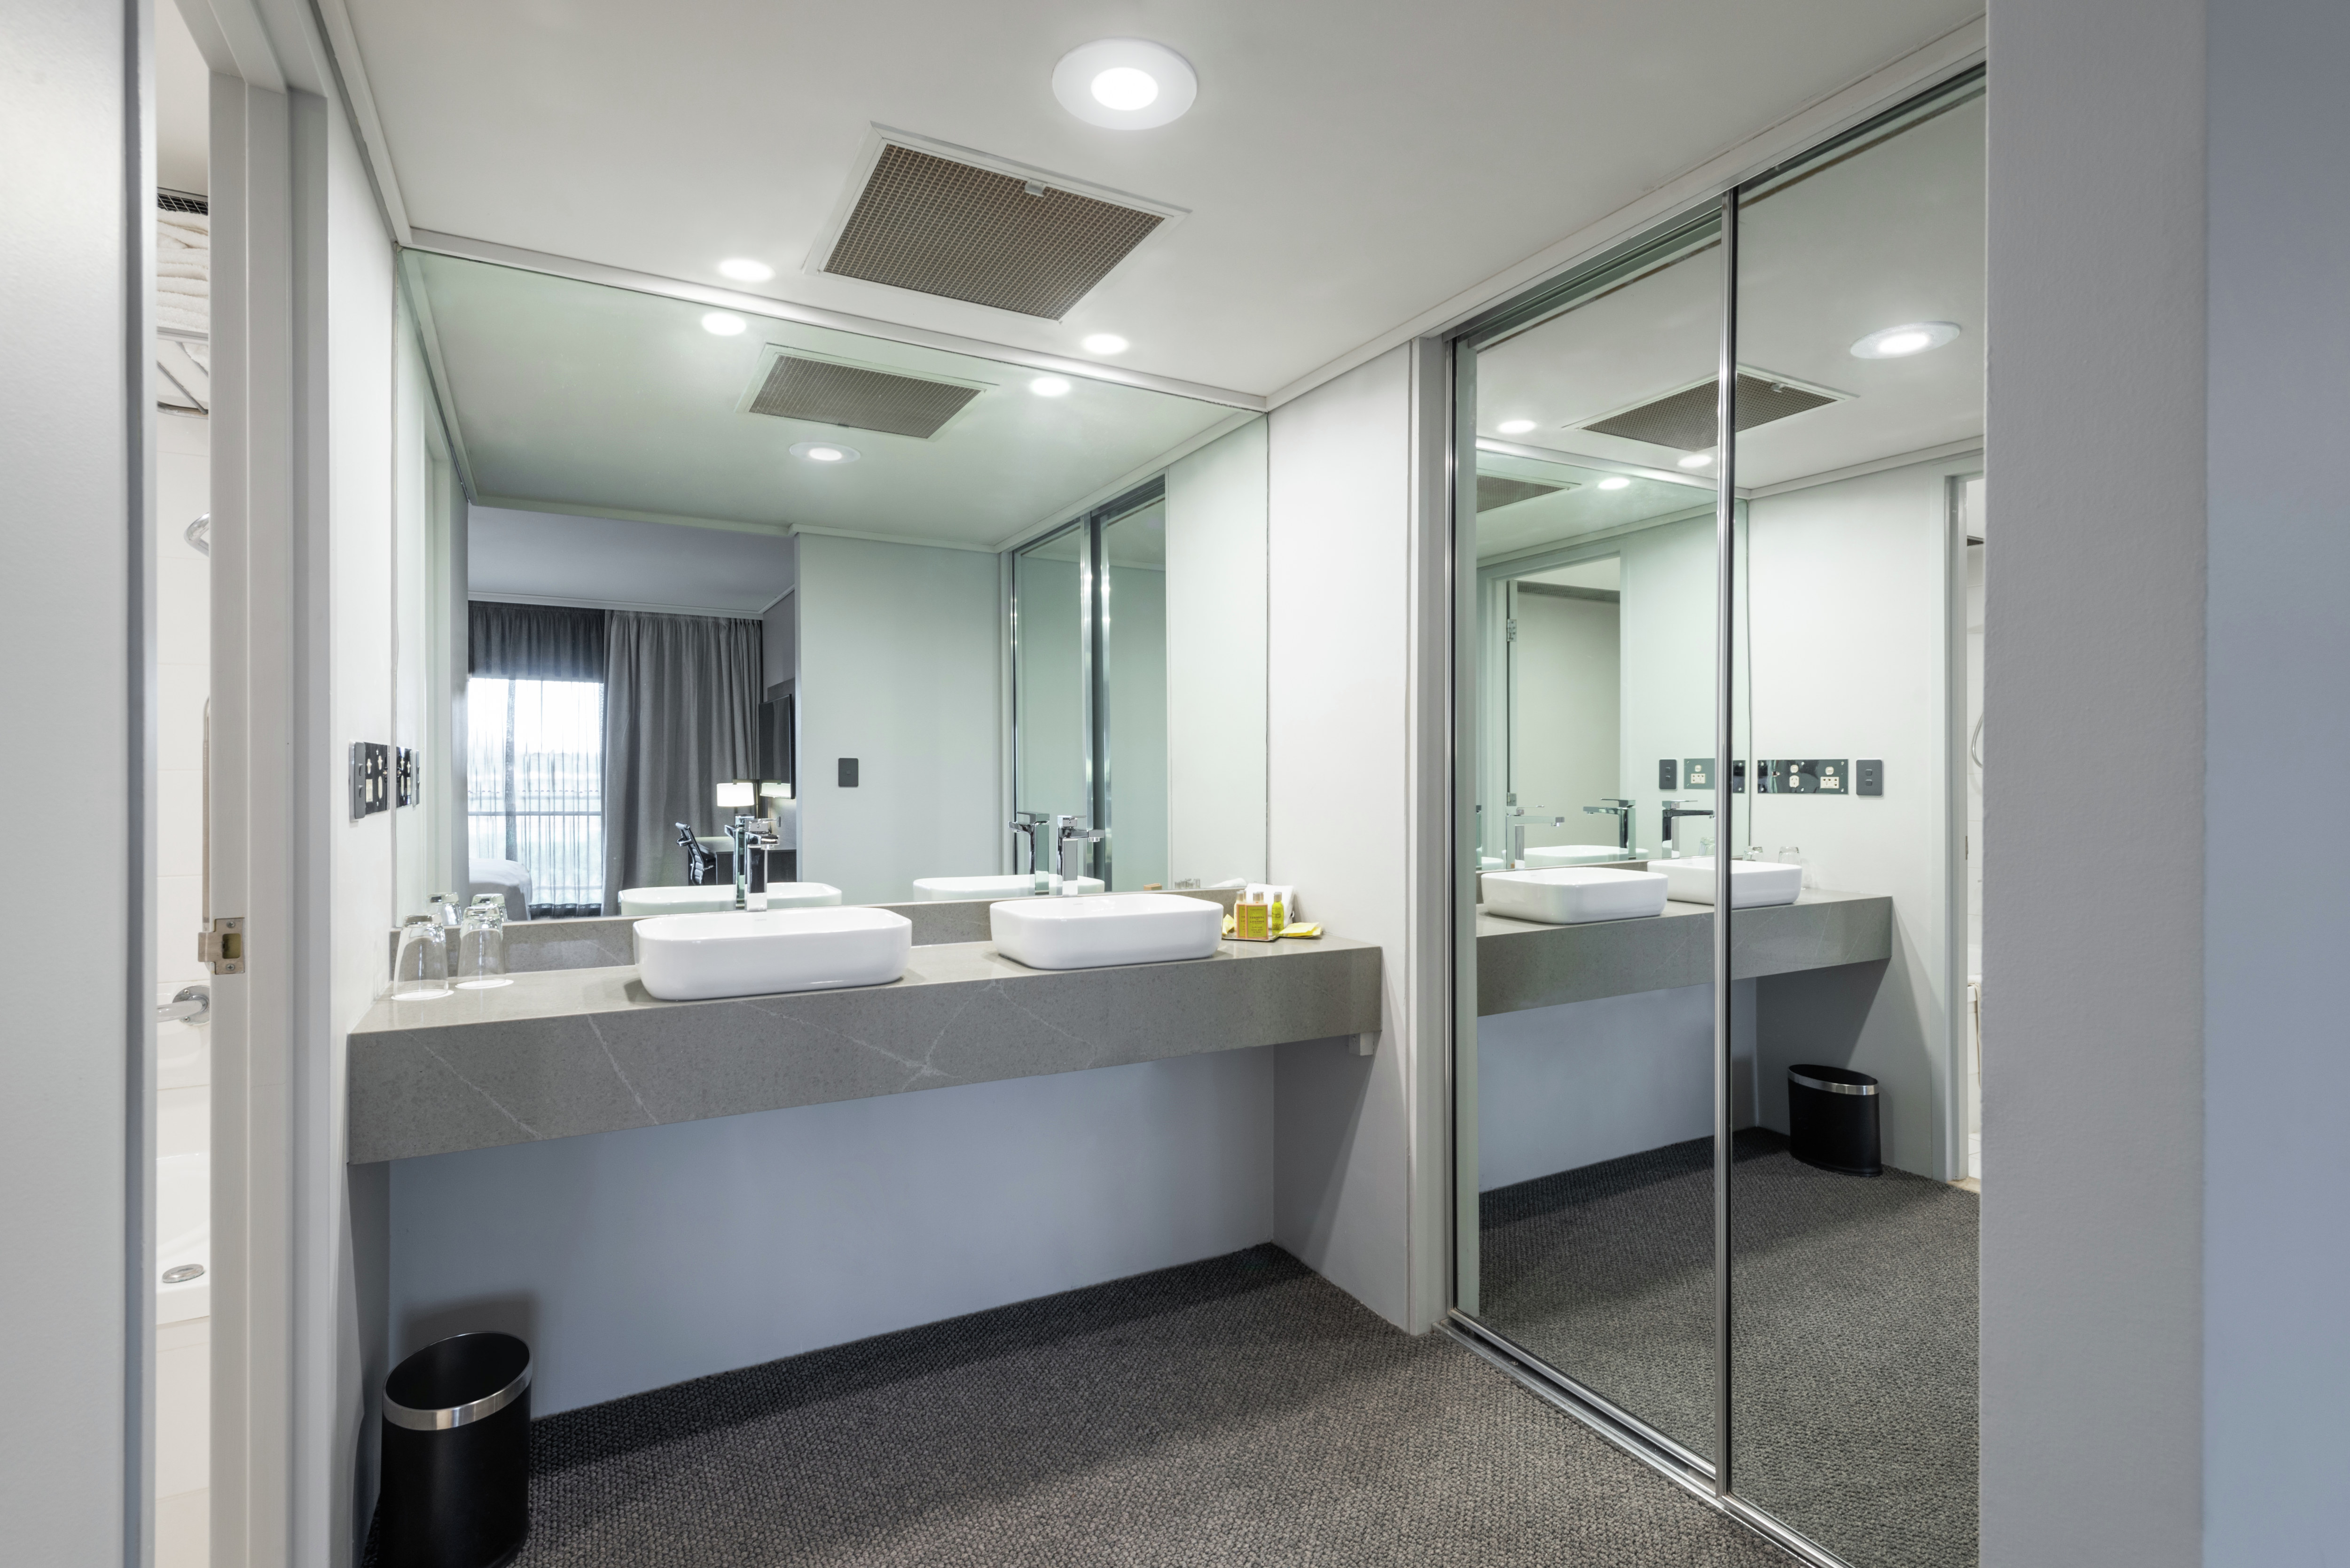 Suite Bathroom with Dual Vanity Area and Large Mirror